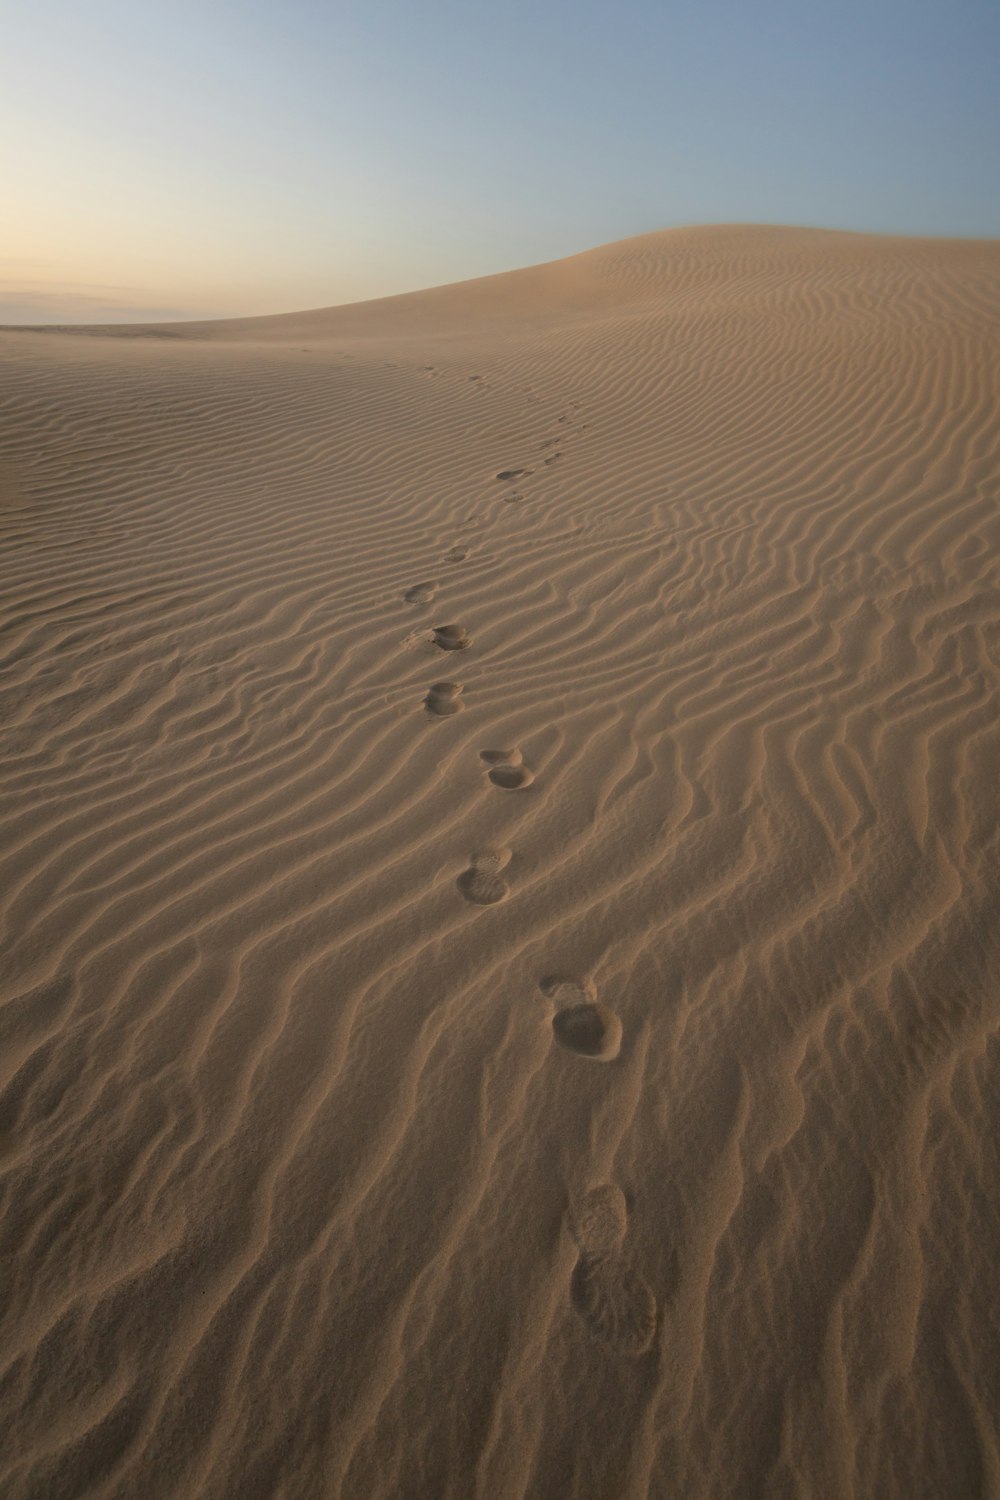 footprints in the sand of a desert at sunset